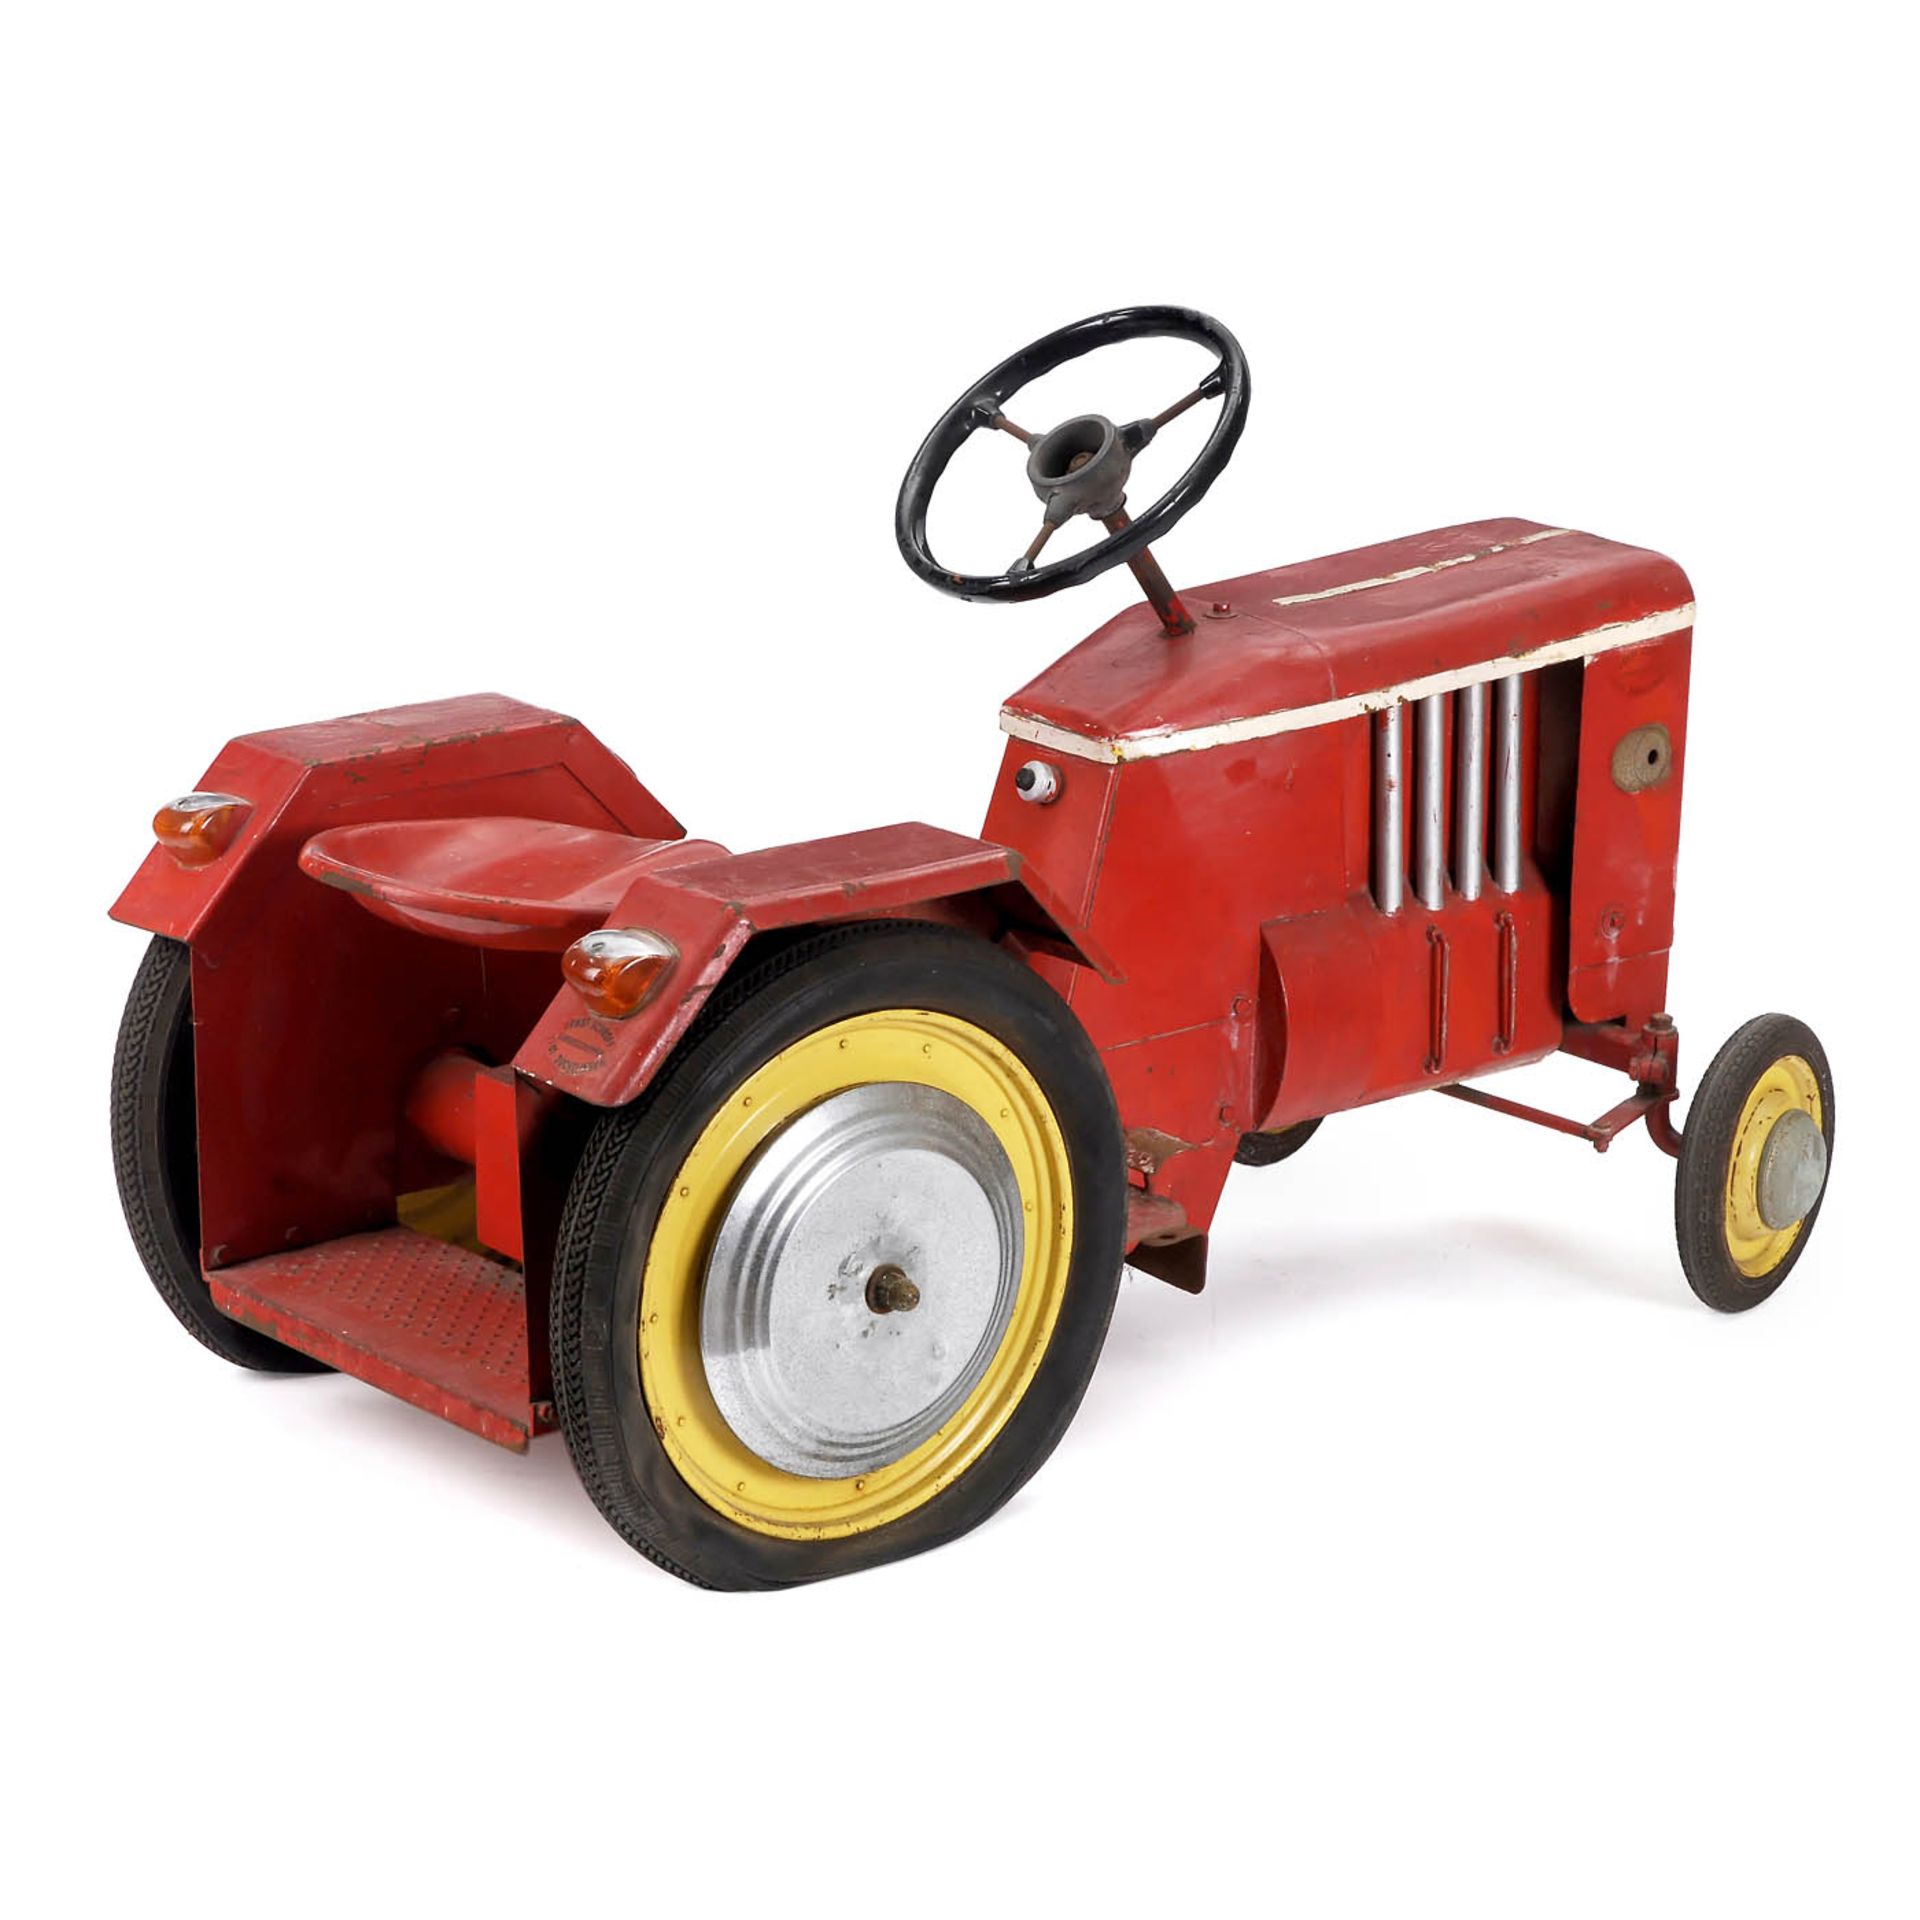 Fahr D33 Tractor from a Children’s Carousel, c. 1970 - Image 2 of 2